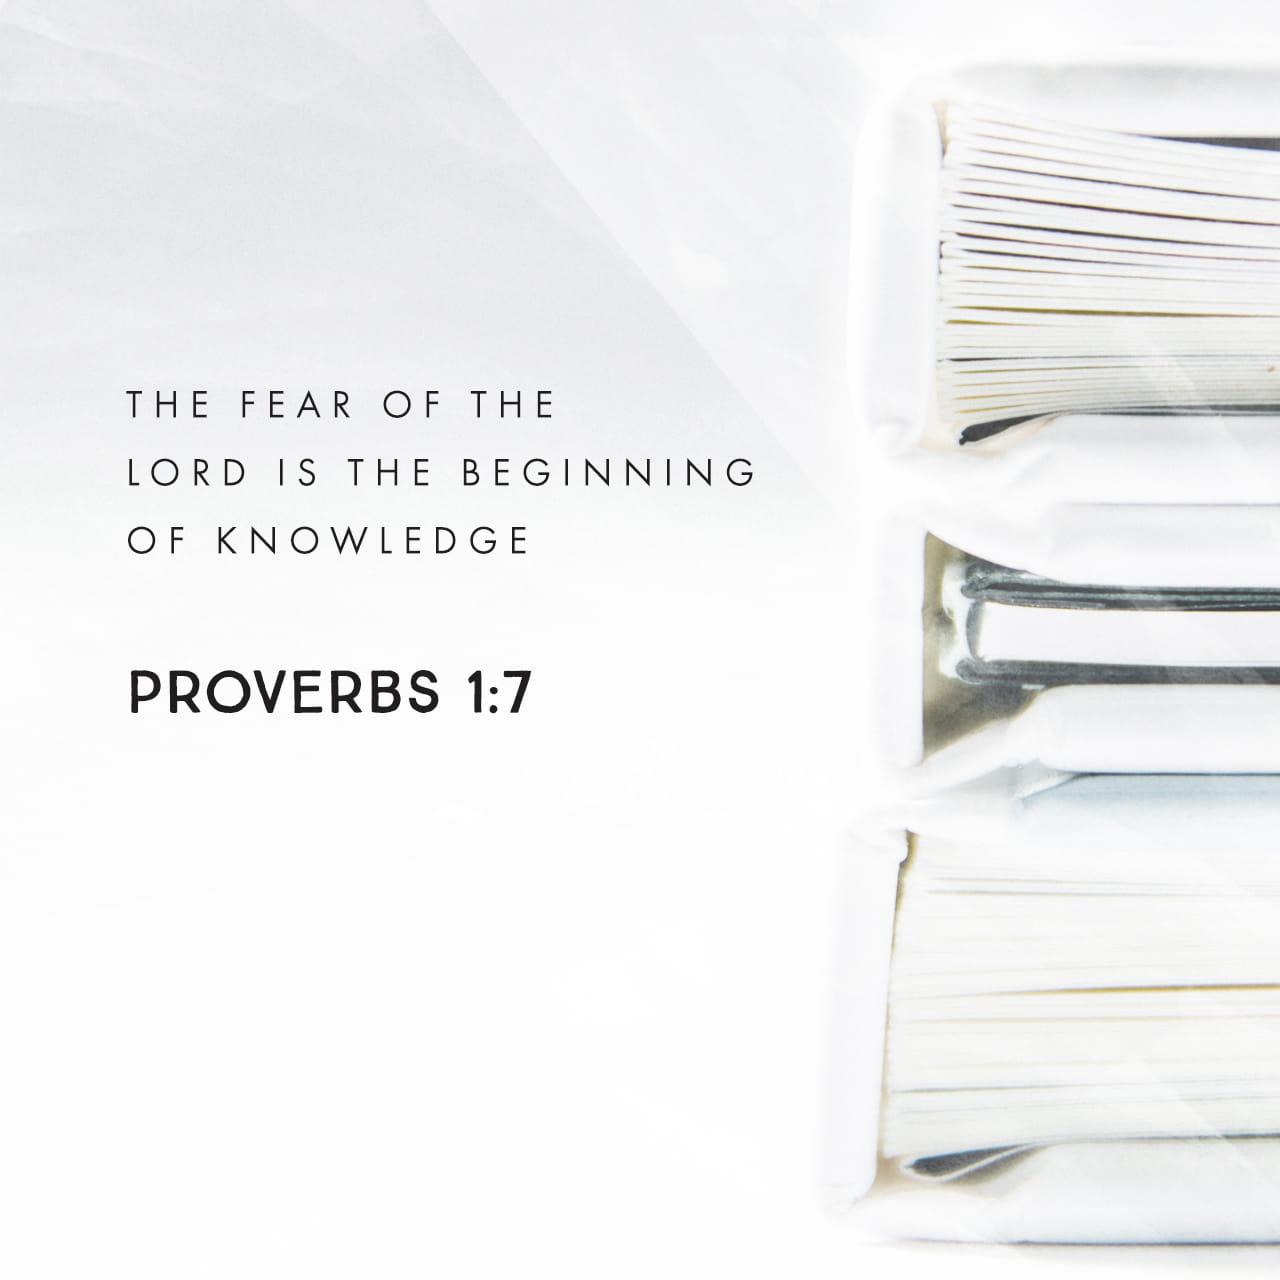 Bible Verse of the Day - day 153 - image 1568 (Proverbs 1:7)